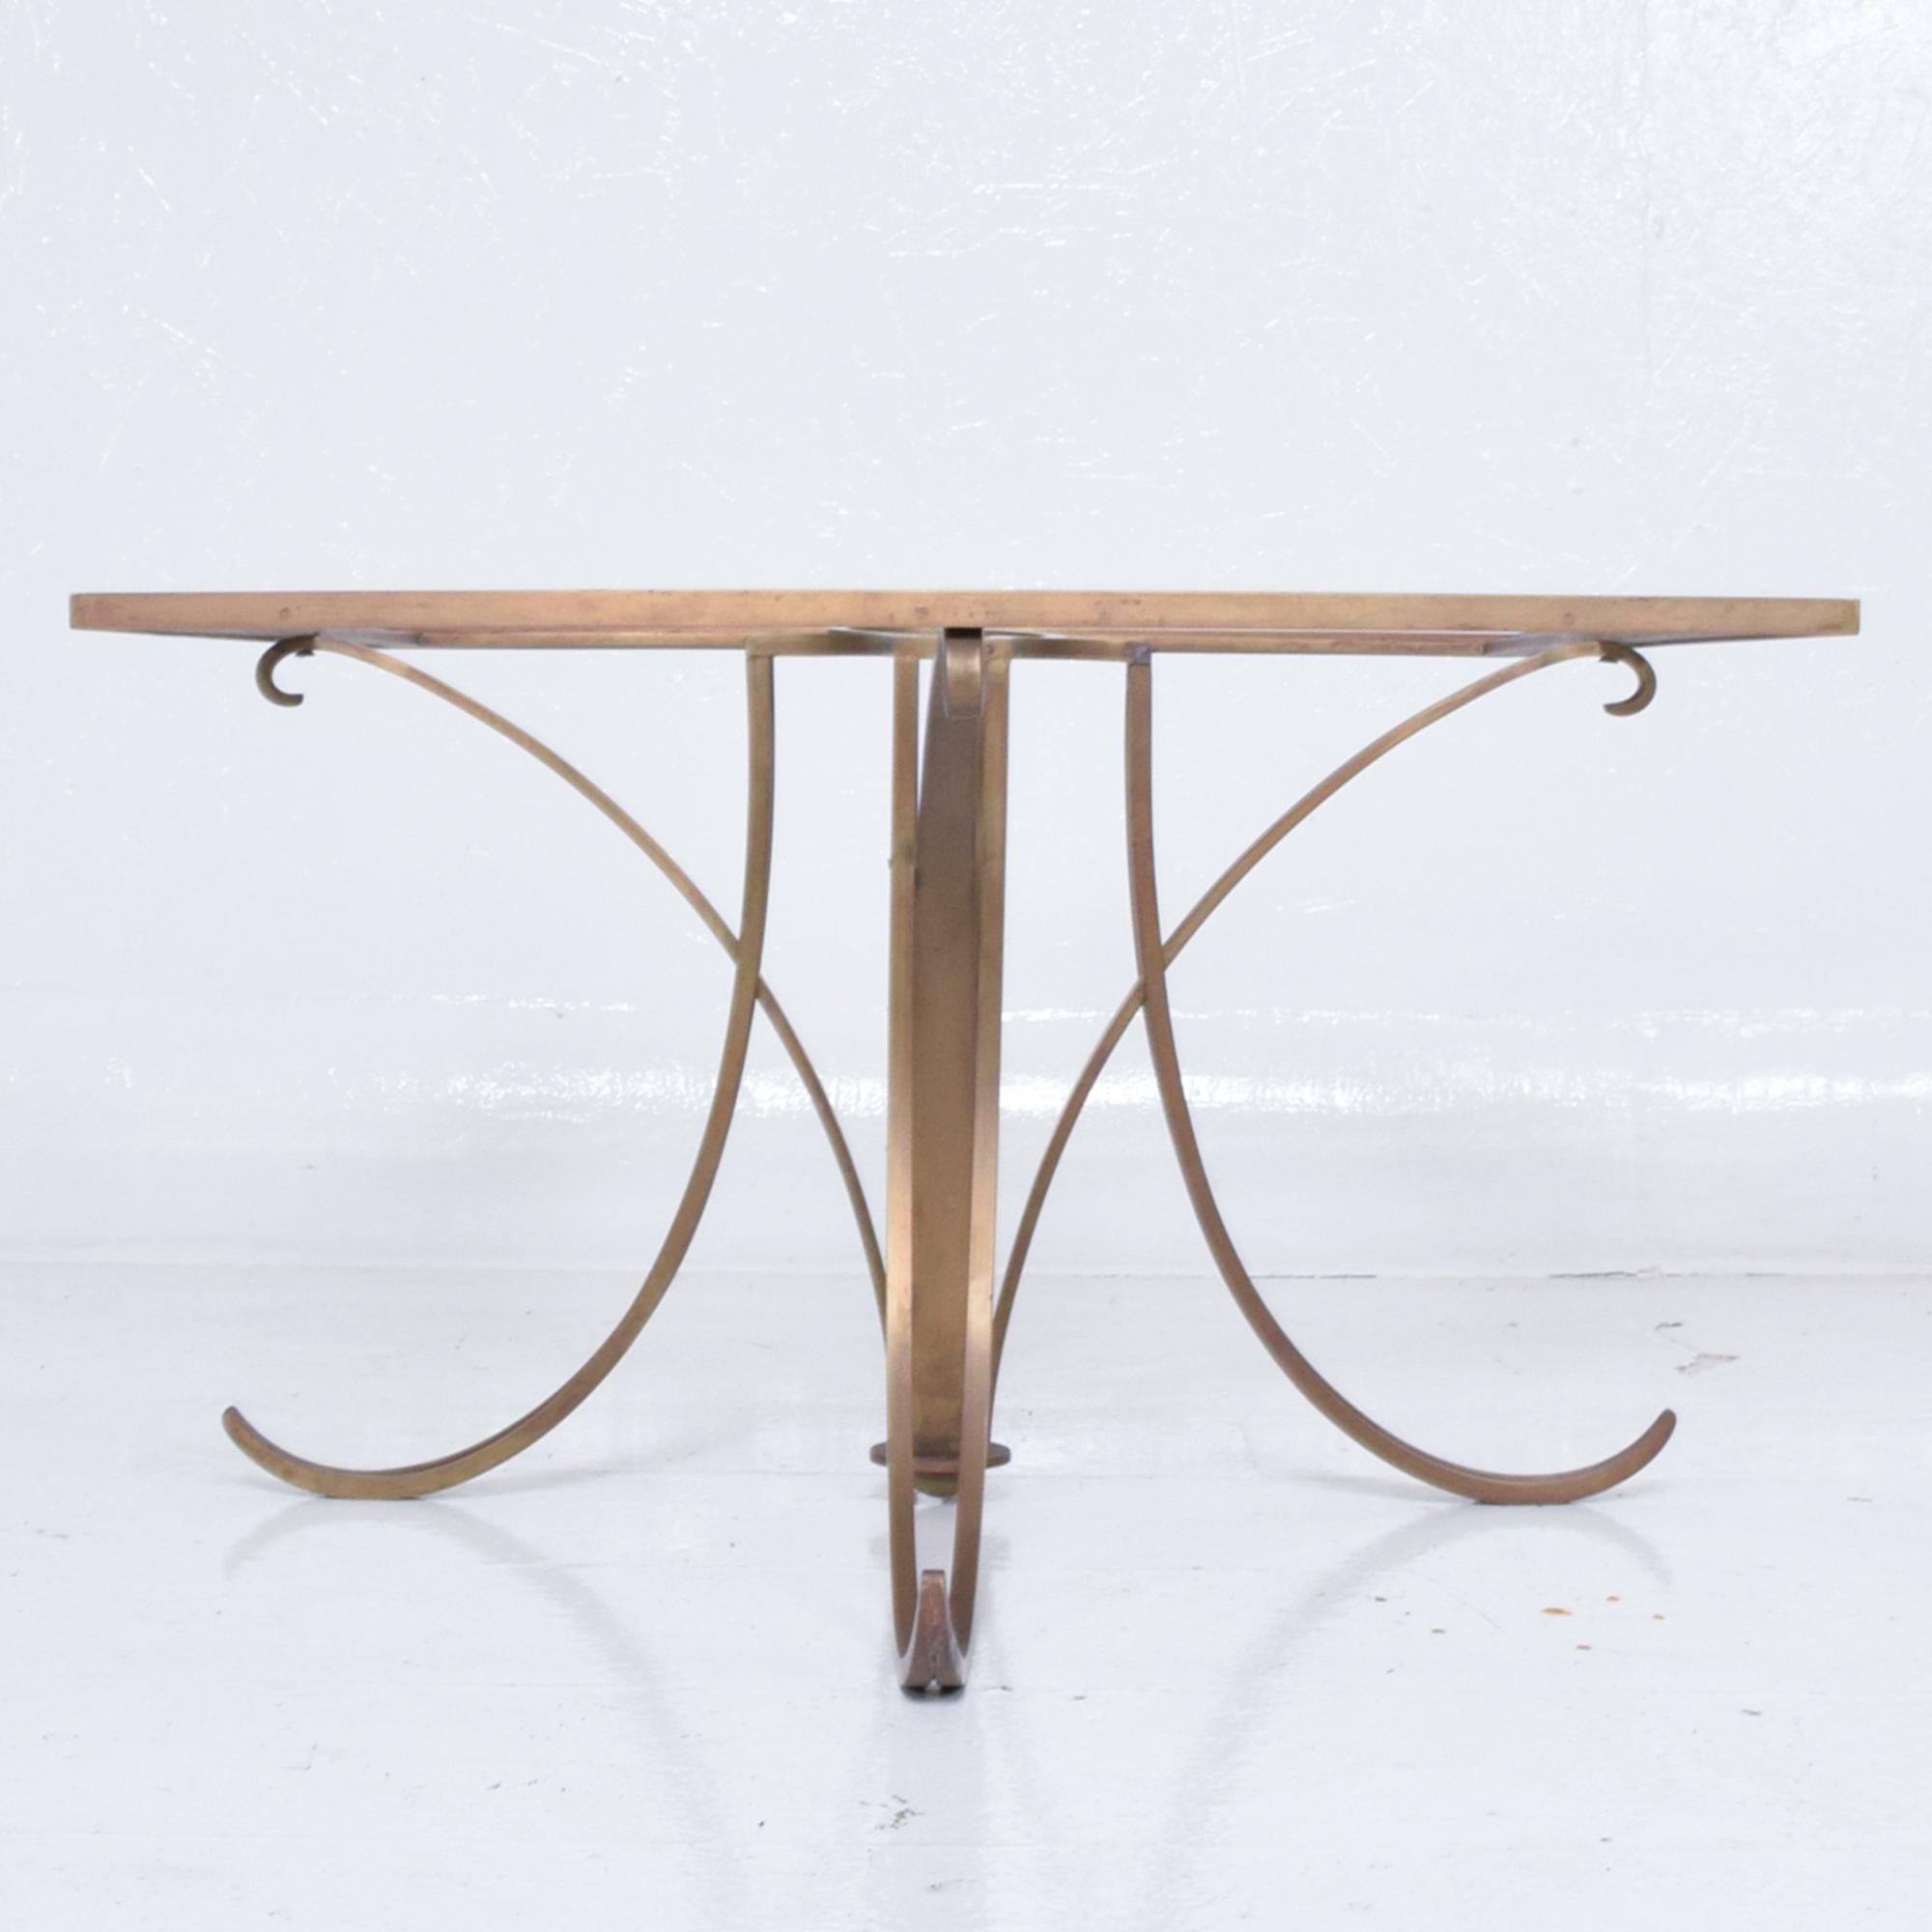 Mid-20th Century Arturo Pani Graceful Modernism Solid Brass Side Tables 1950s Mexico